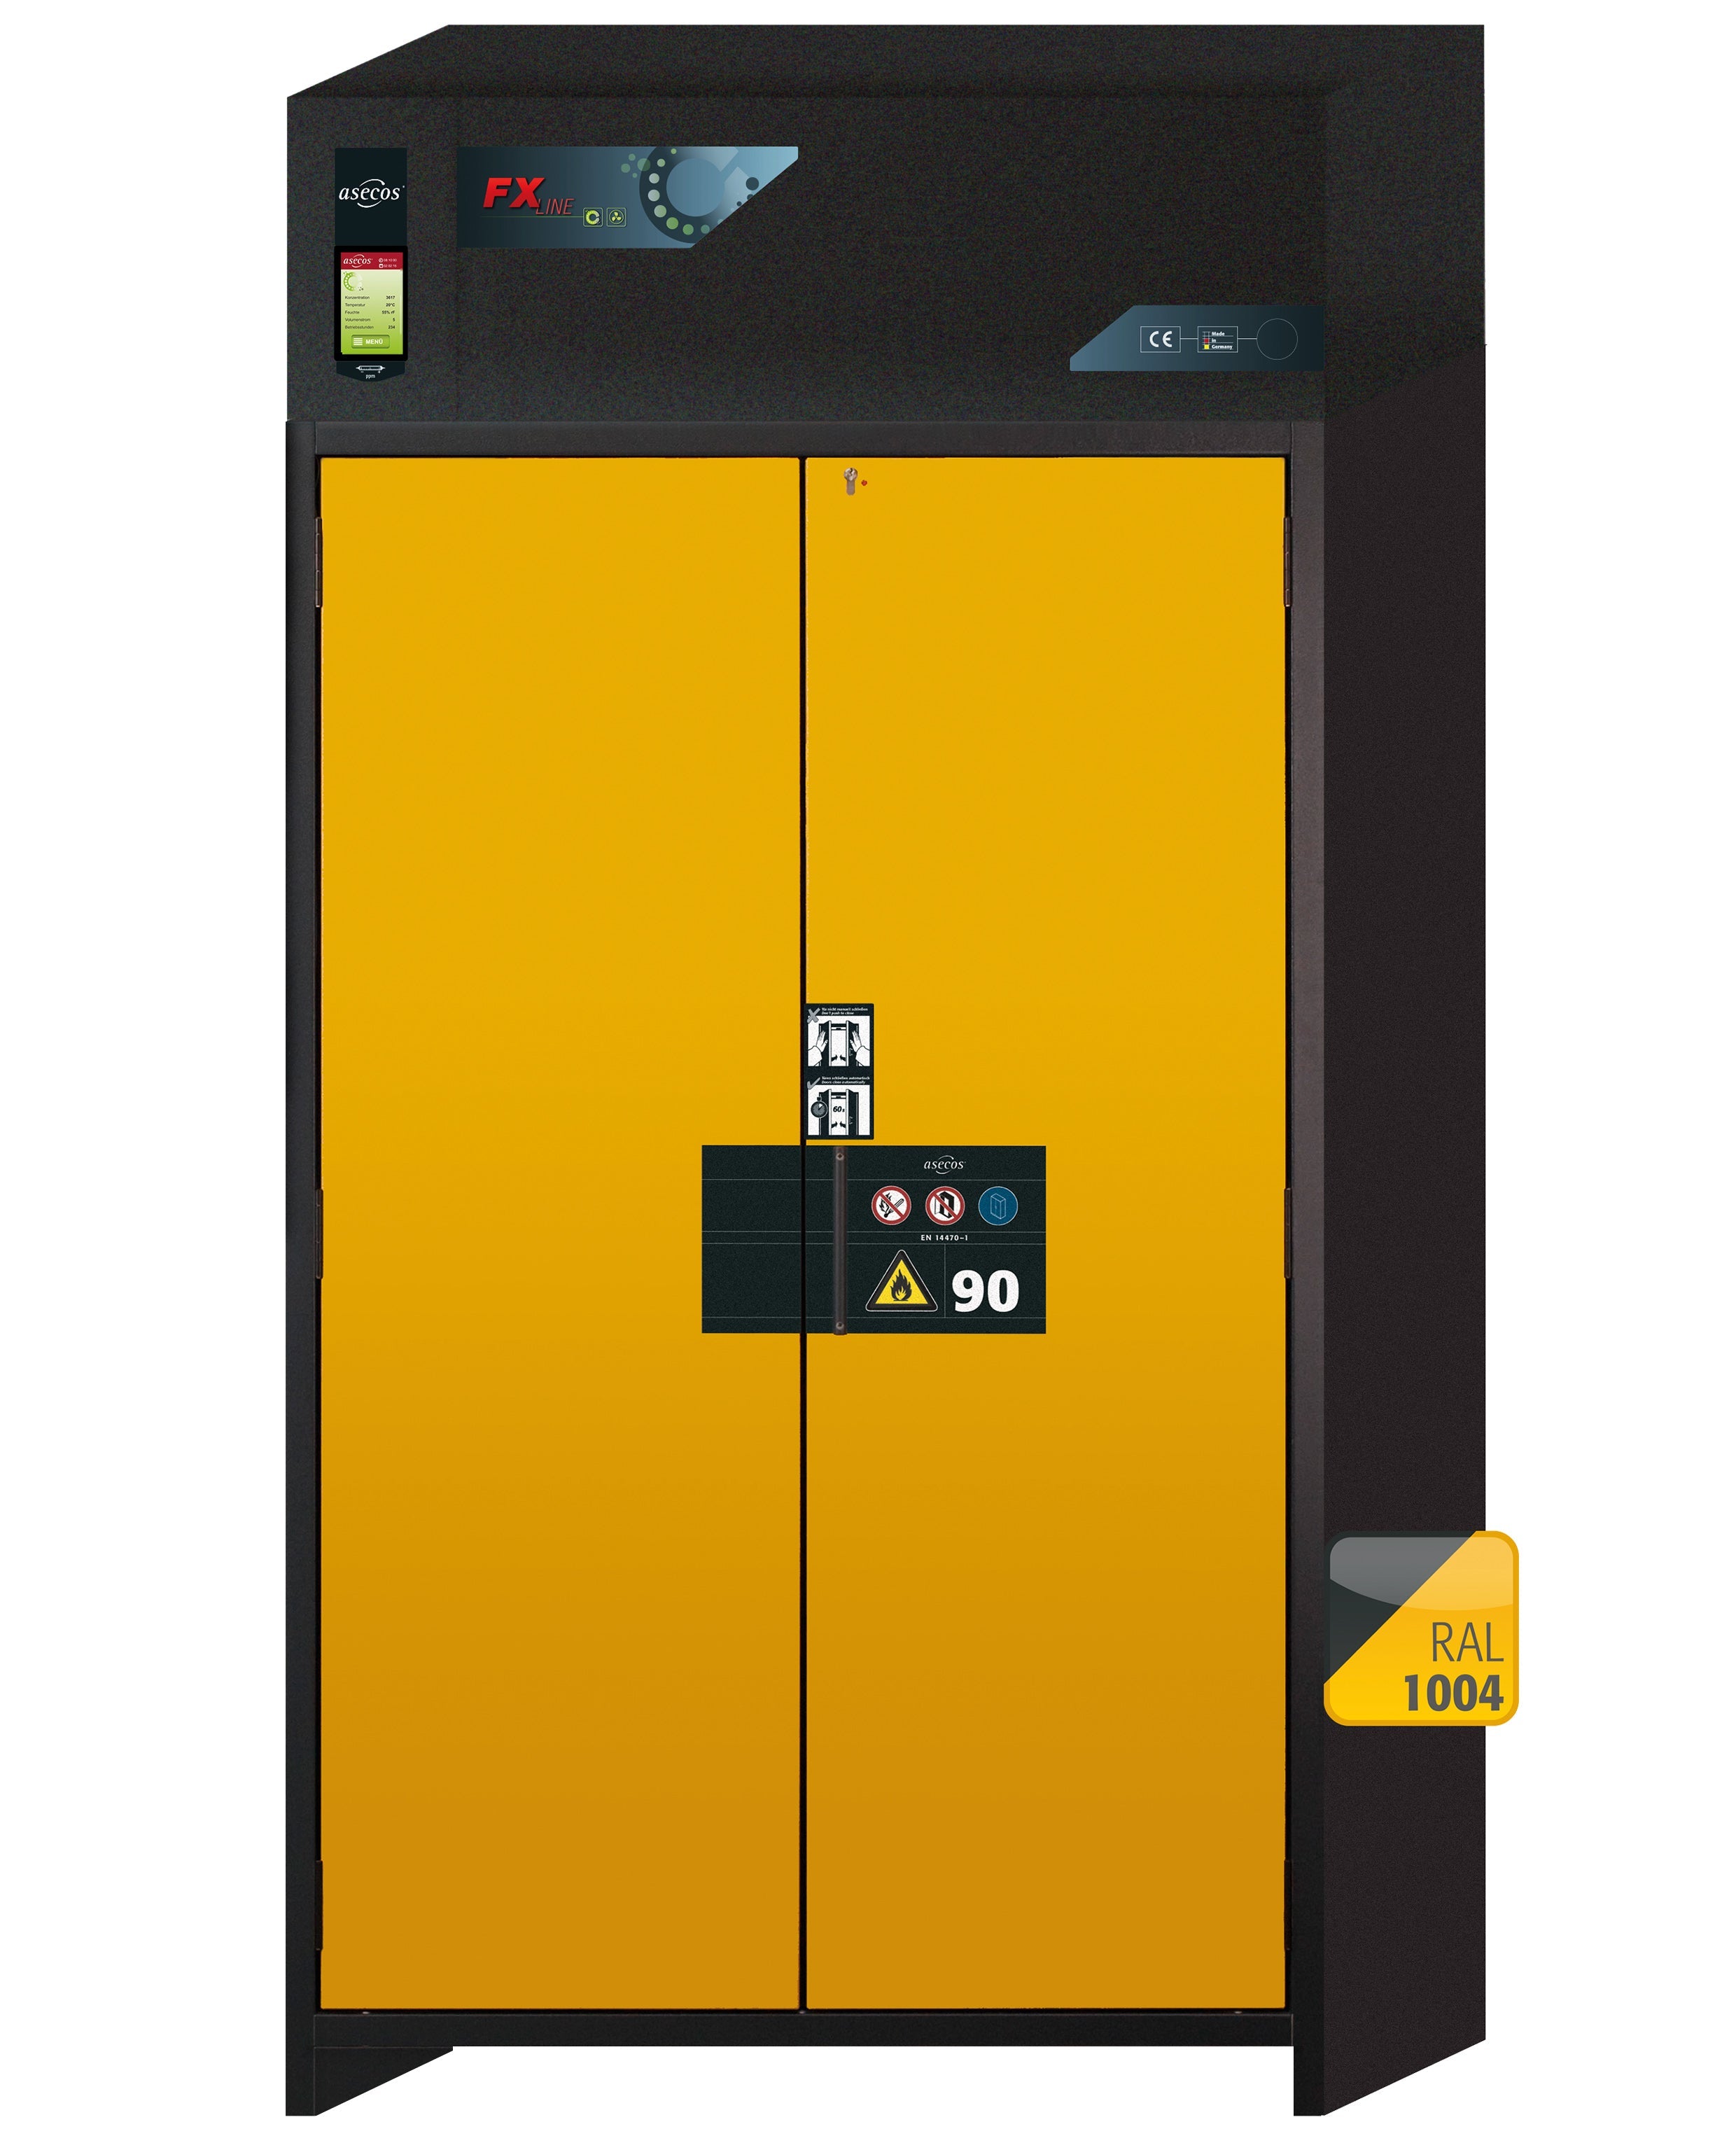 Type 90 recirculating air filter cabinet FX-PEGASUS-90 model FX90.229.120.WDAC in safety yellow RAL 1004 with 5x standard pull-out tray (stainless steel 1.4301)